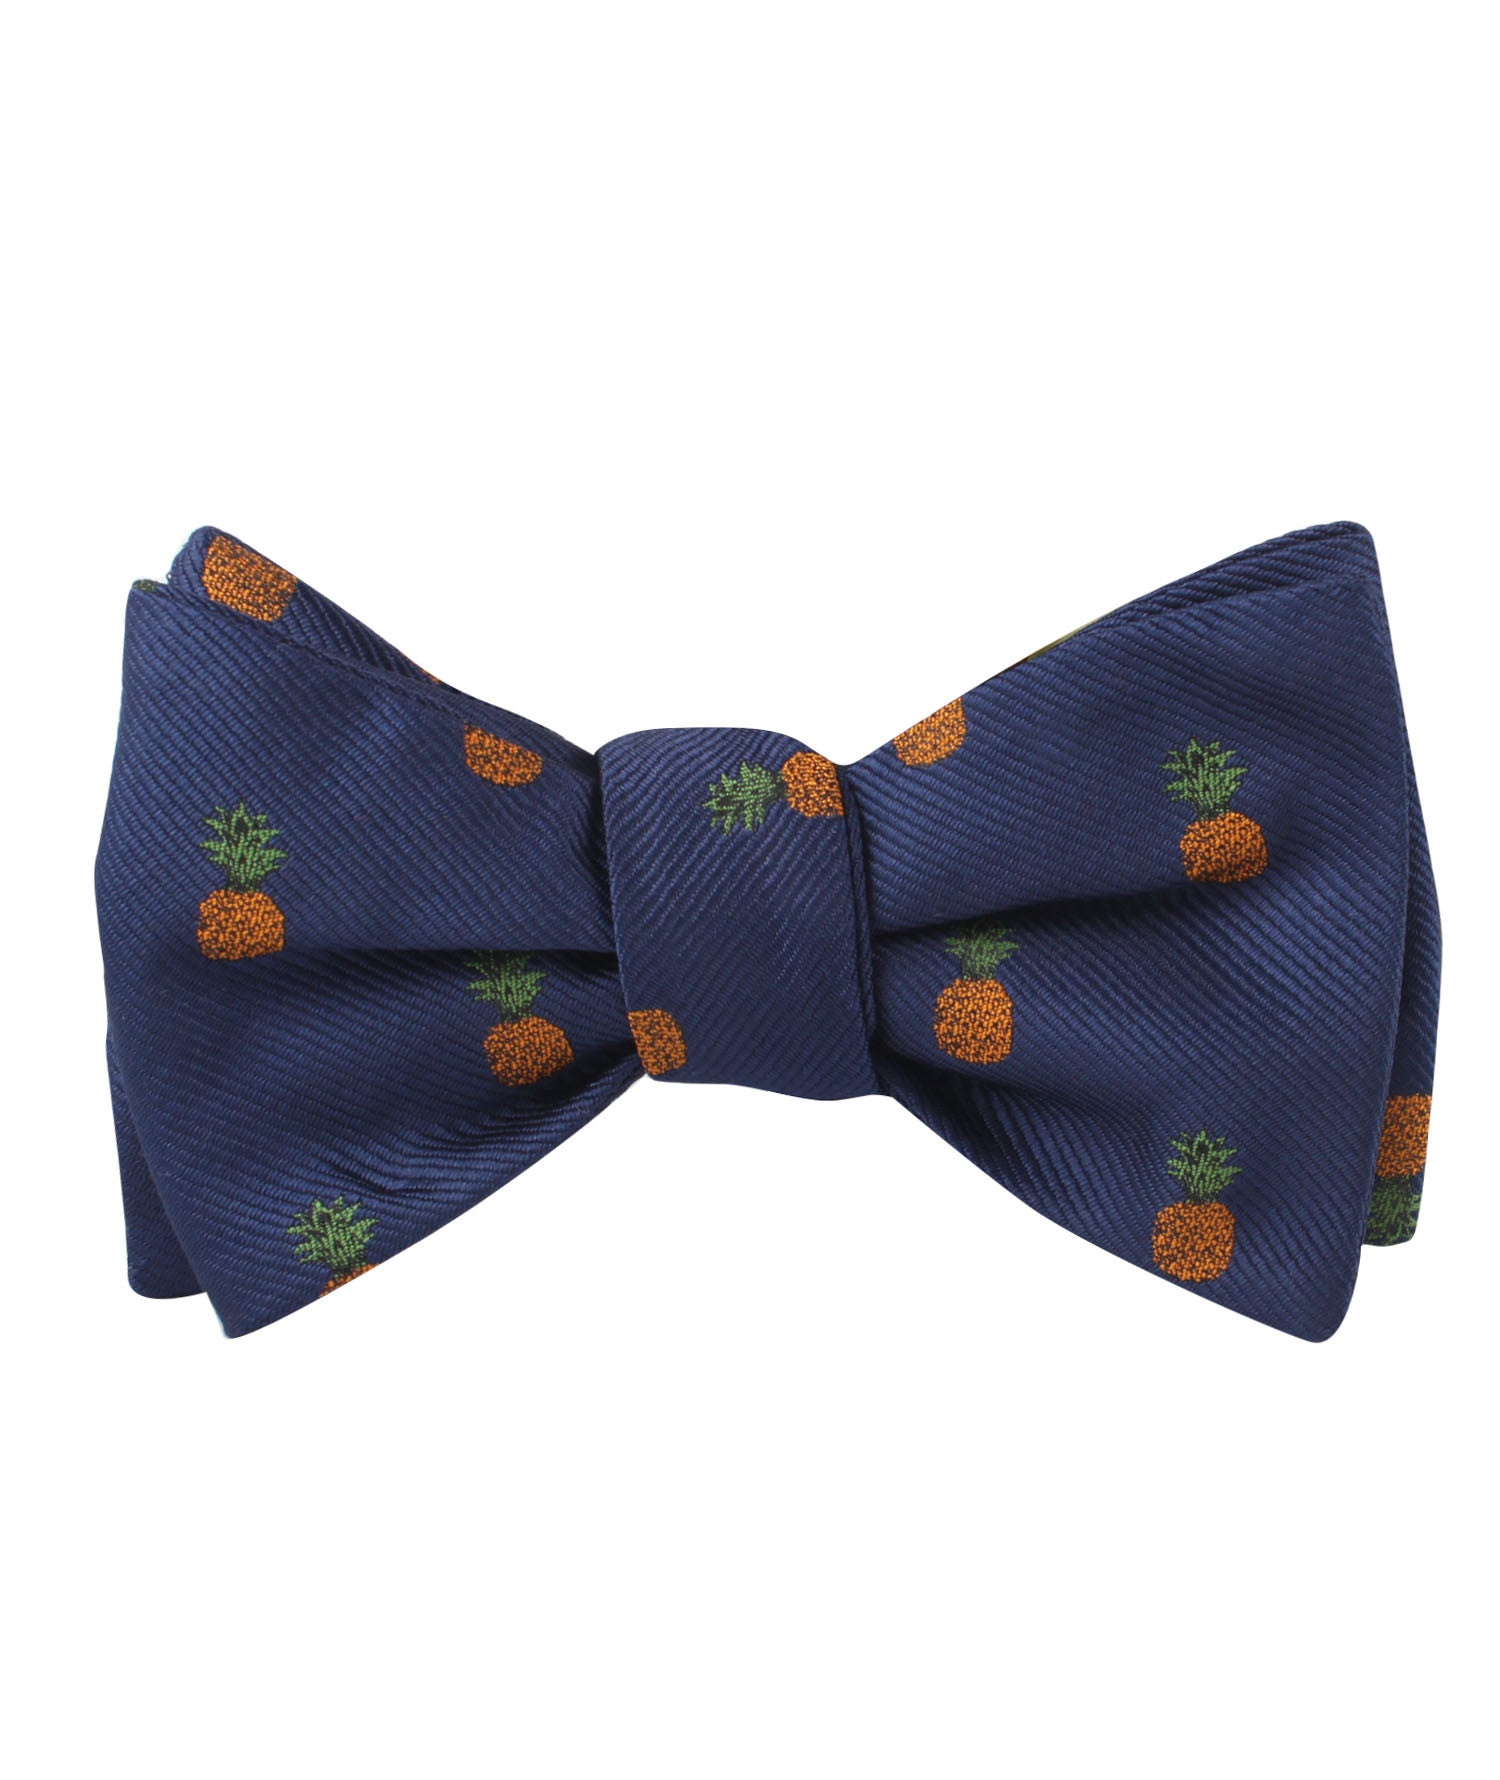 Pineapple Self Bow Tie | Tropical Fruit Untied Bowtie Holiday Bow Ties ...